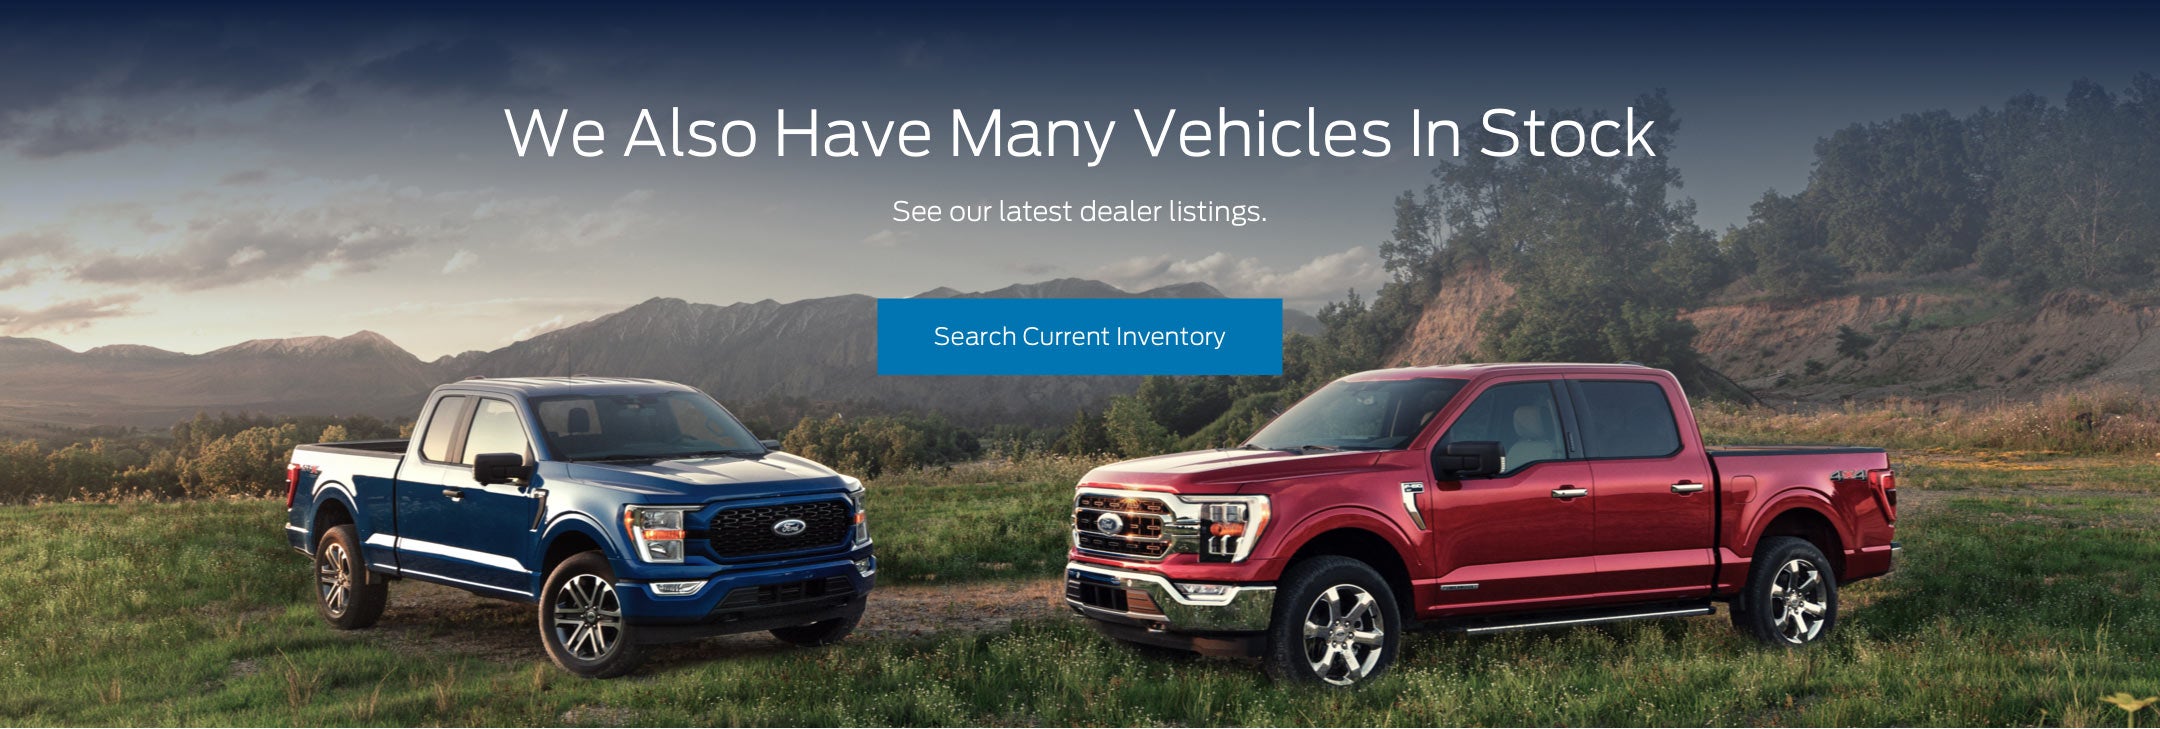 Ford vehicles in stock | Crossroads Ford of Waynesville in Waynesville NC